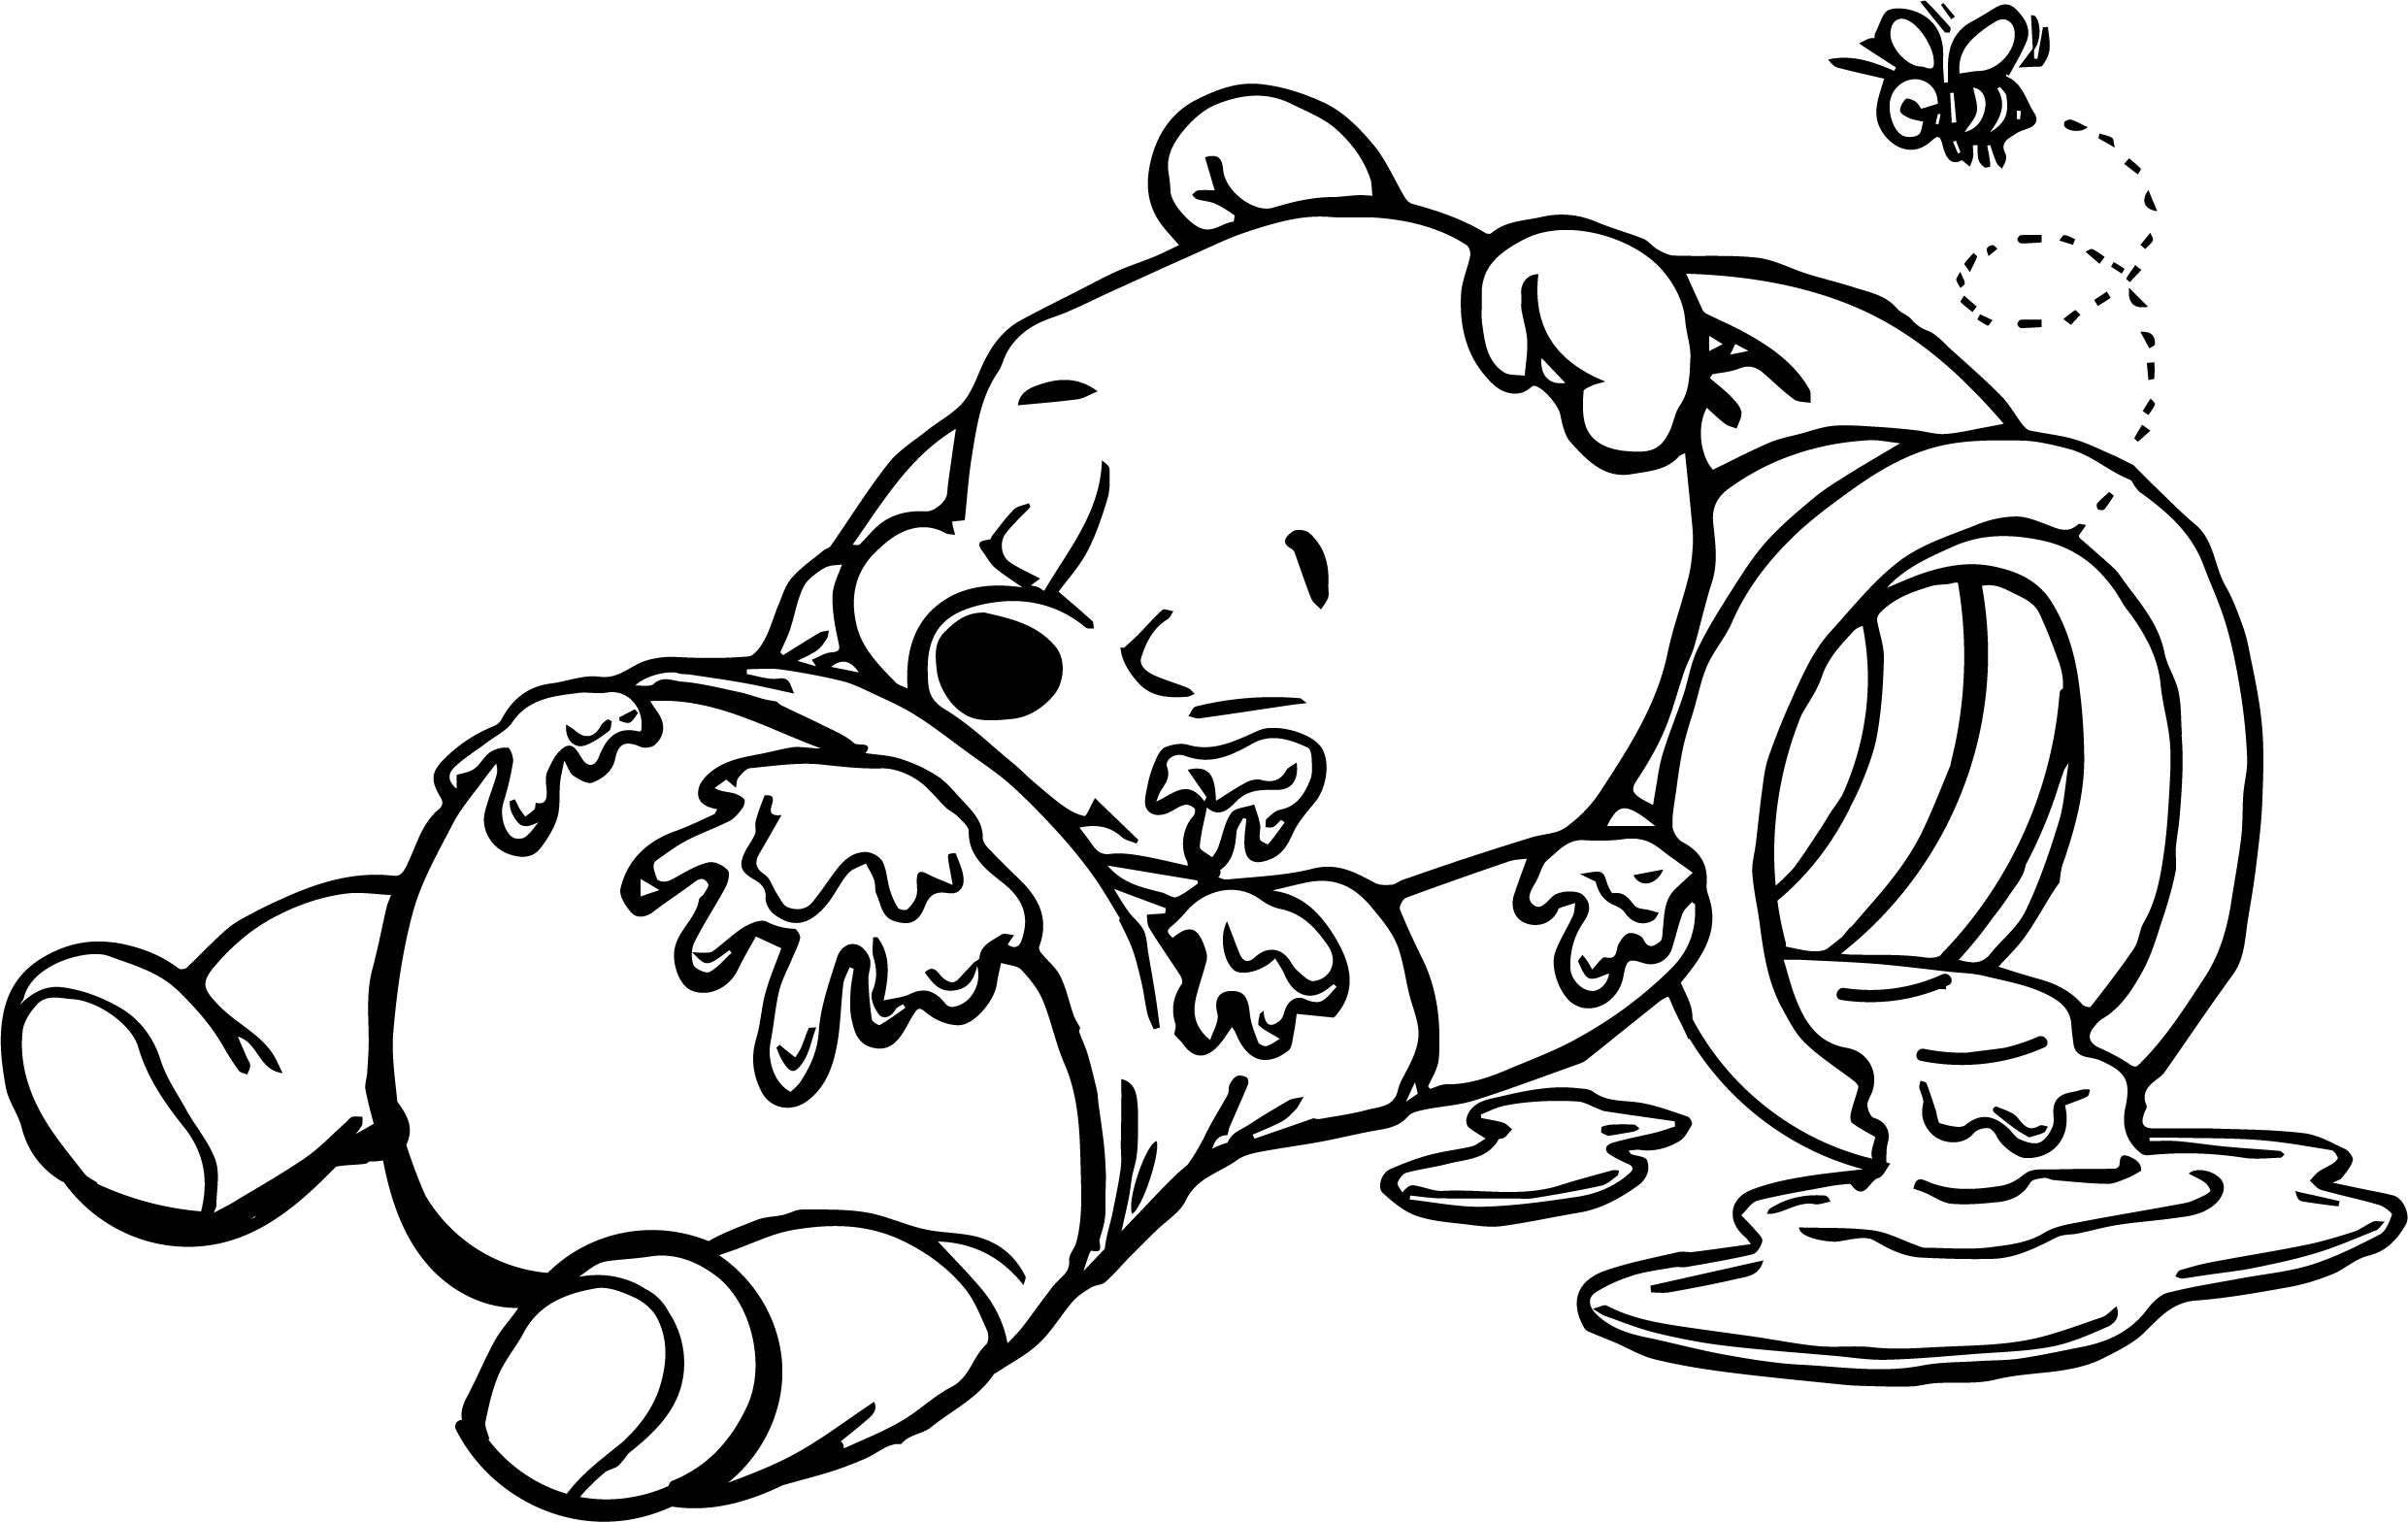 Winnie The Pooh Coloring Pages Online Coloring Pages Free Printable Winnie The Pooh Coloring Pages Free